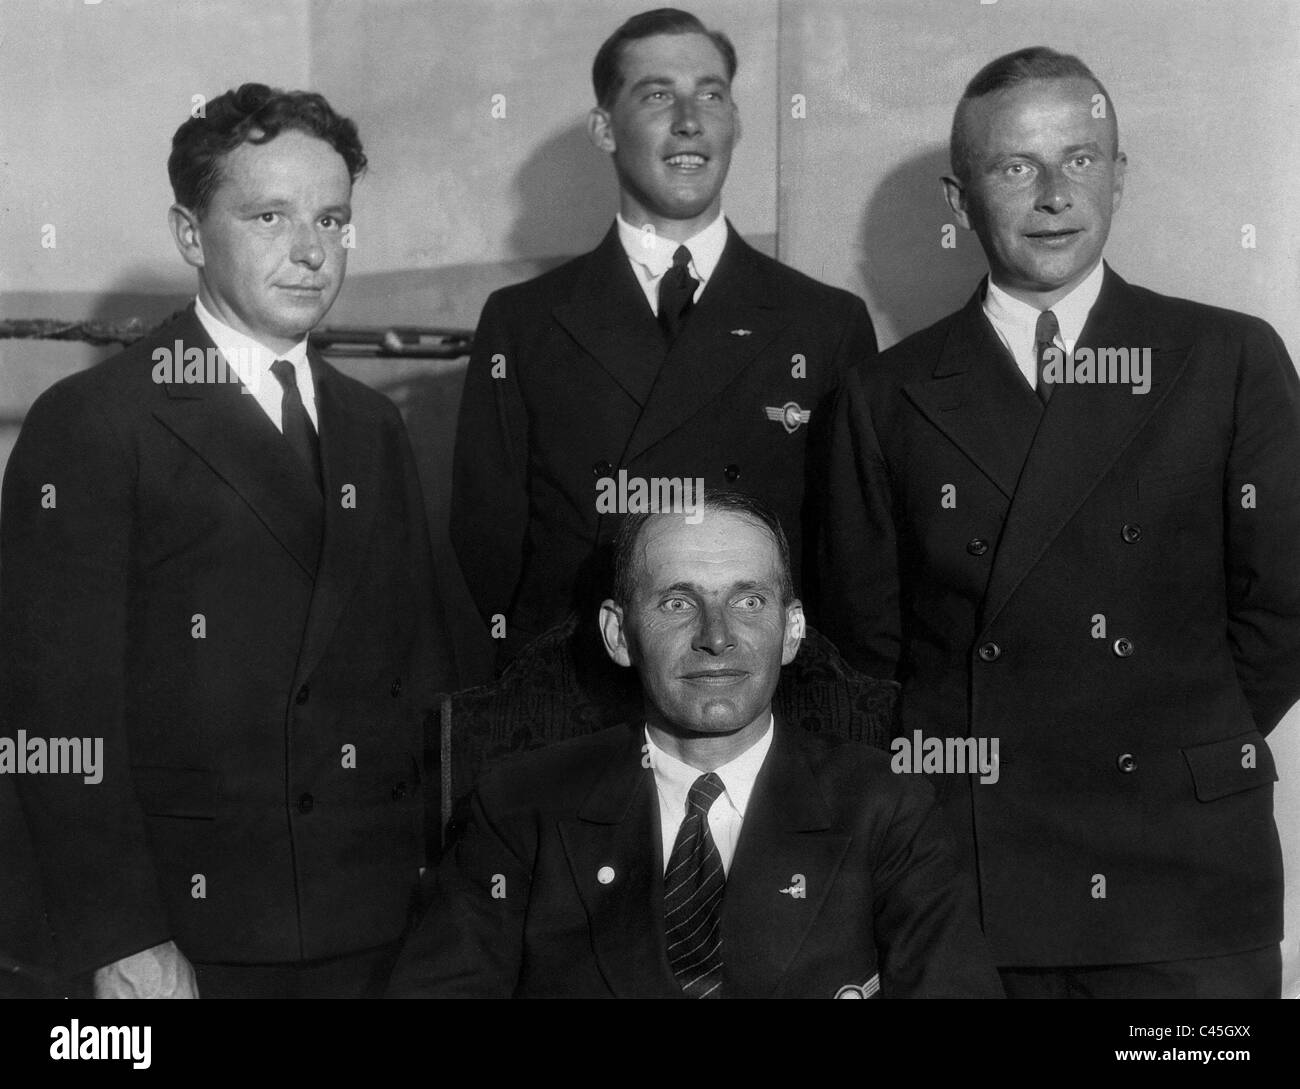 Wolfgang von Gronau and his team in Chicago, 1932 Stock Photo